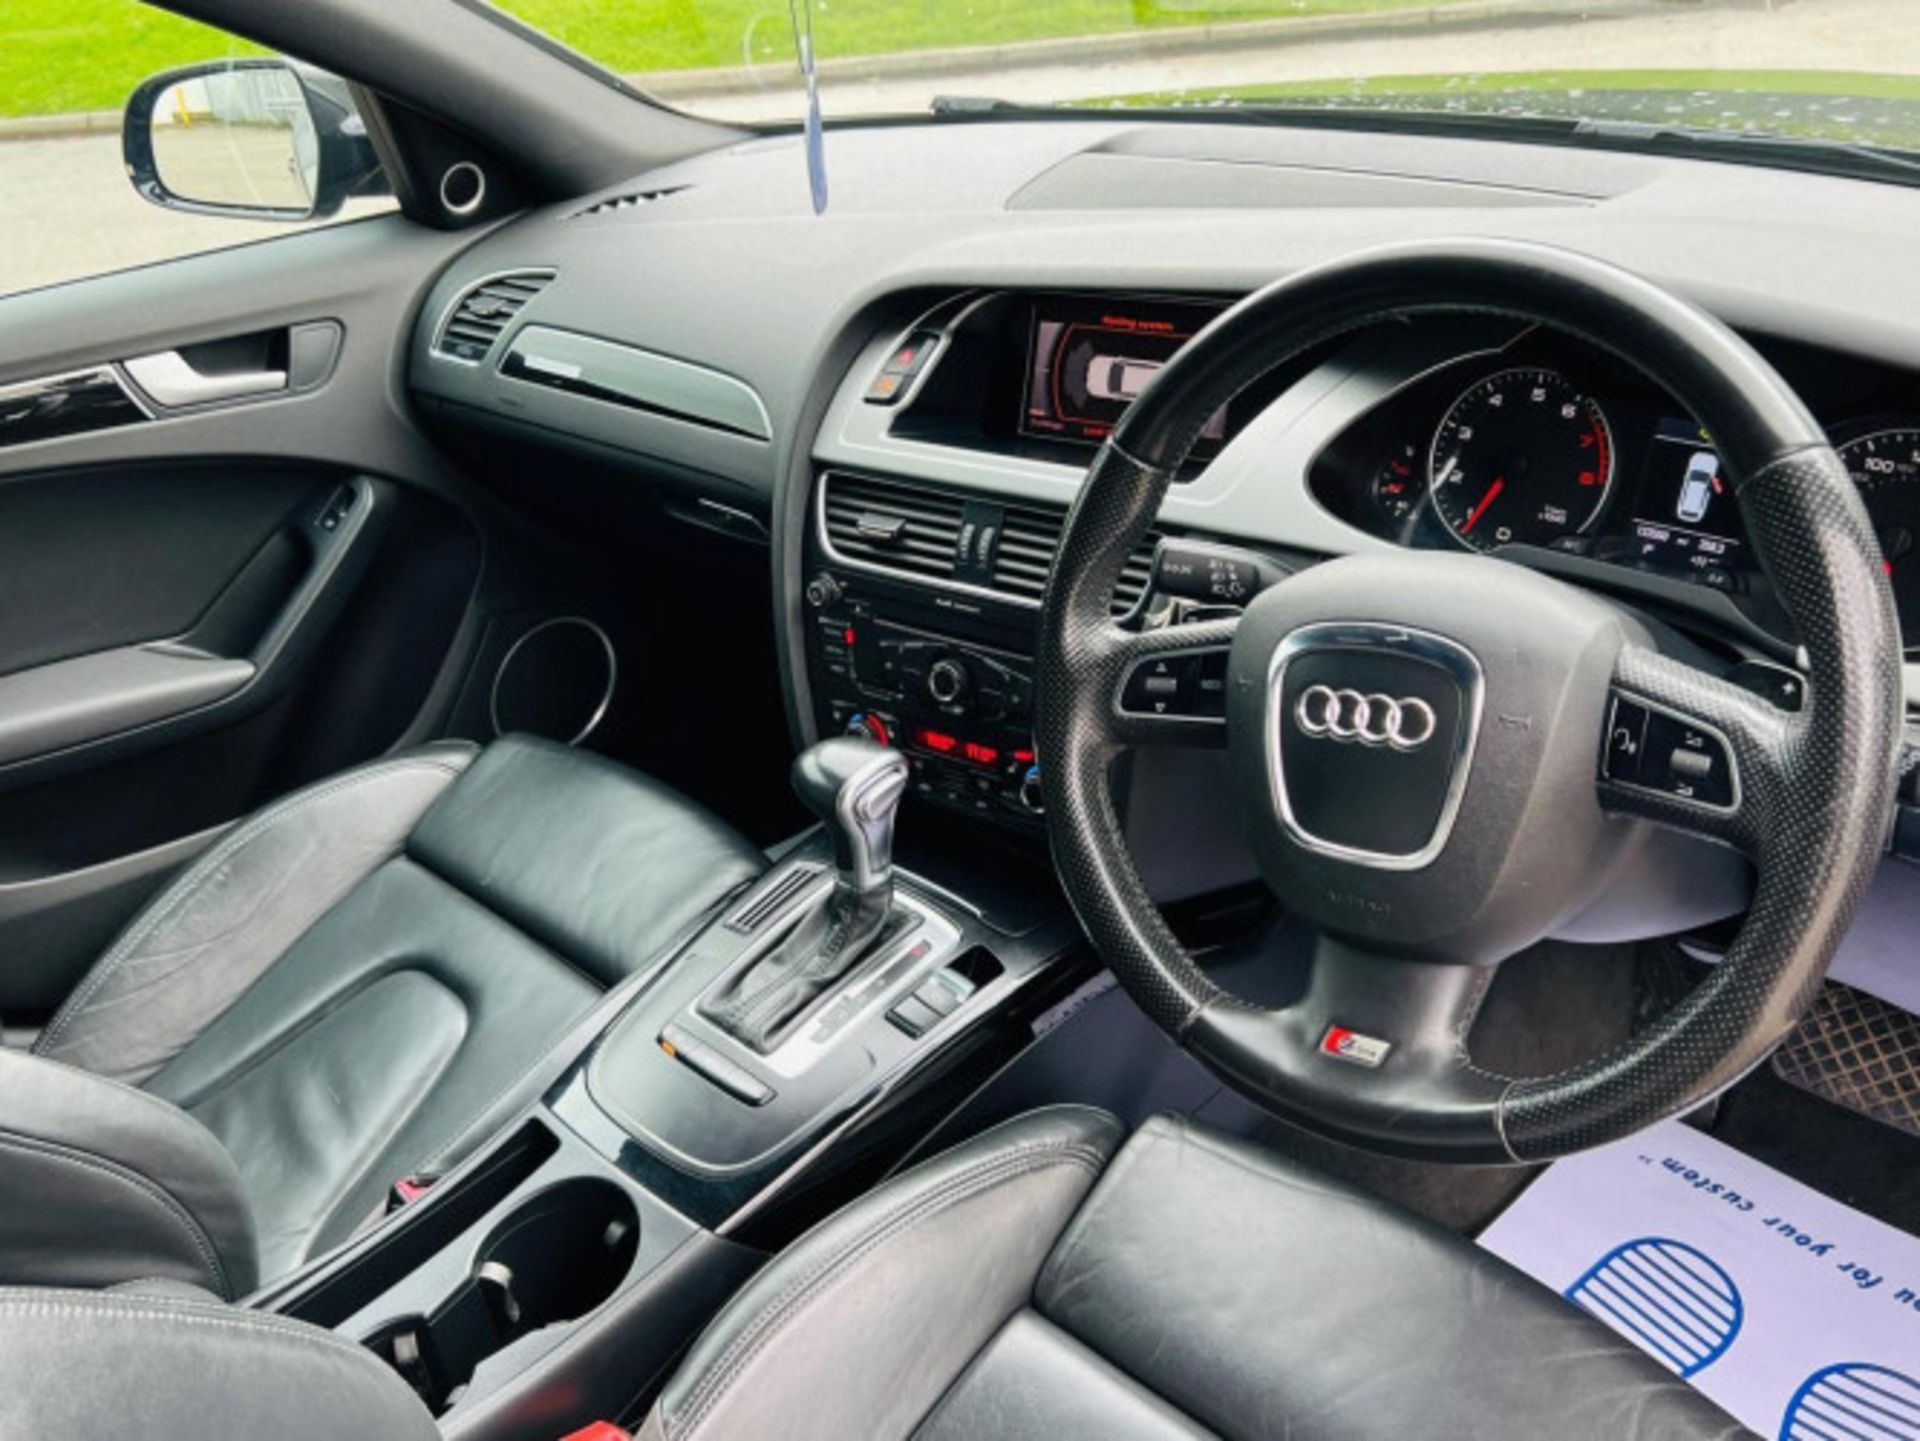 2010 AUDI A4 AVANT 2.0 TFSI S LINE SPECIAL EDITION S TRONIC QUATTRO >>--NO VAT ON HAMMER--<< - Image 86 of 115